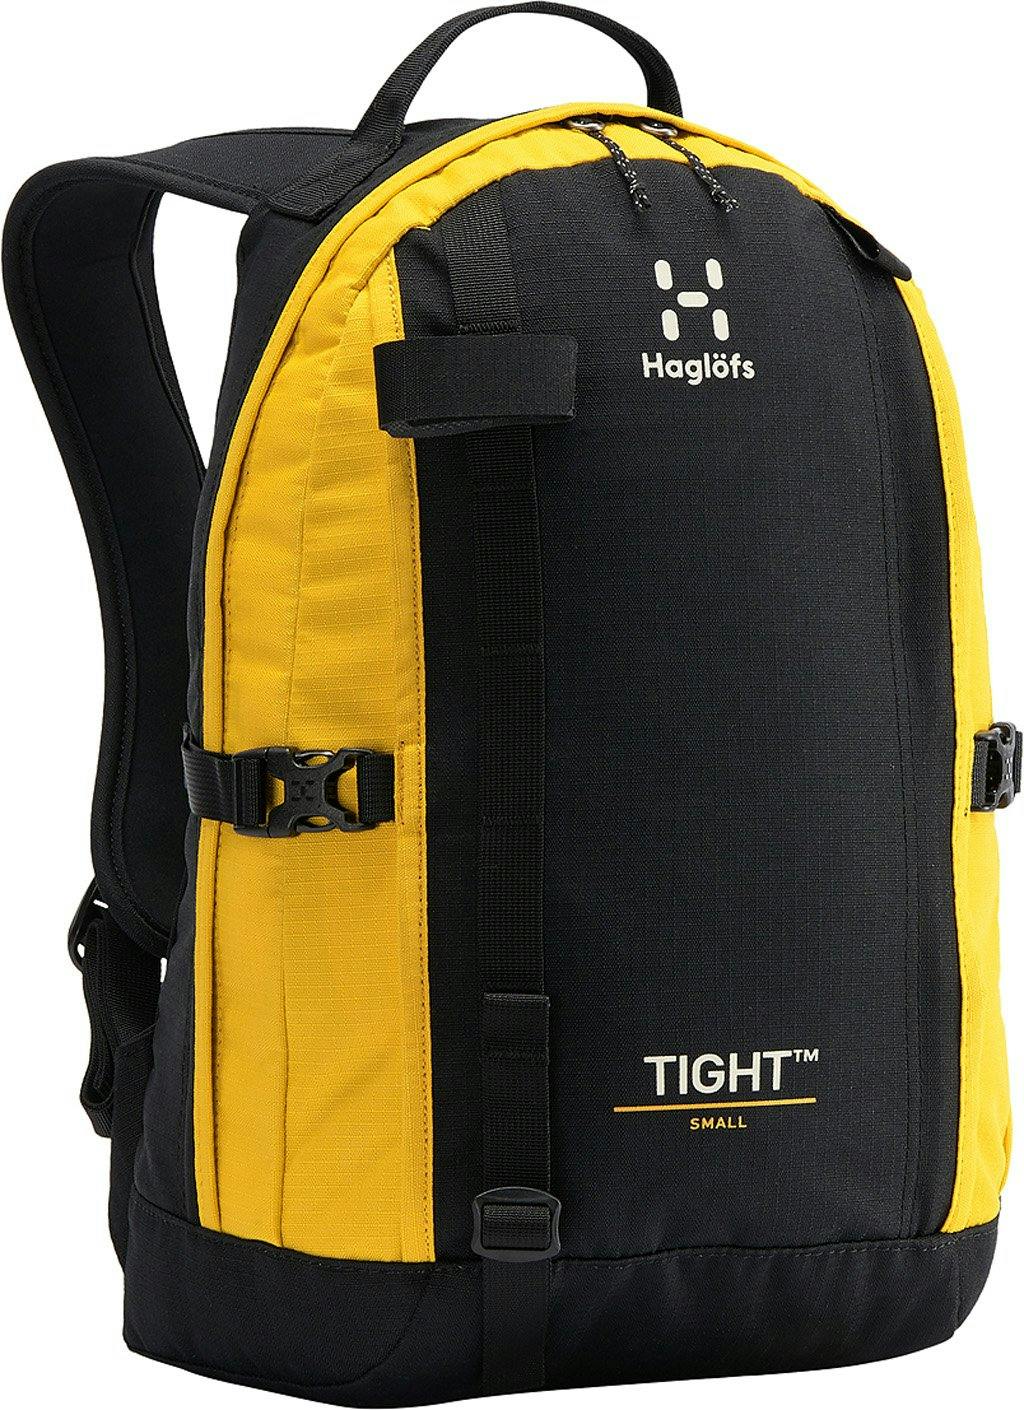 Product image for Tight Small Bagpacks - Unisex